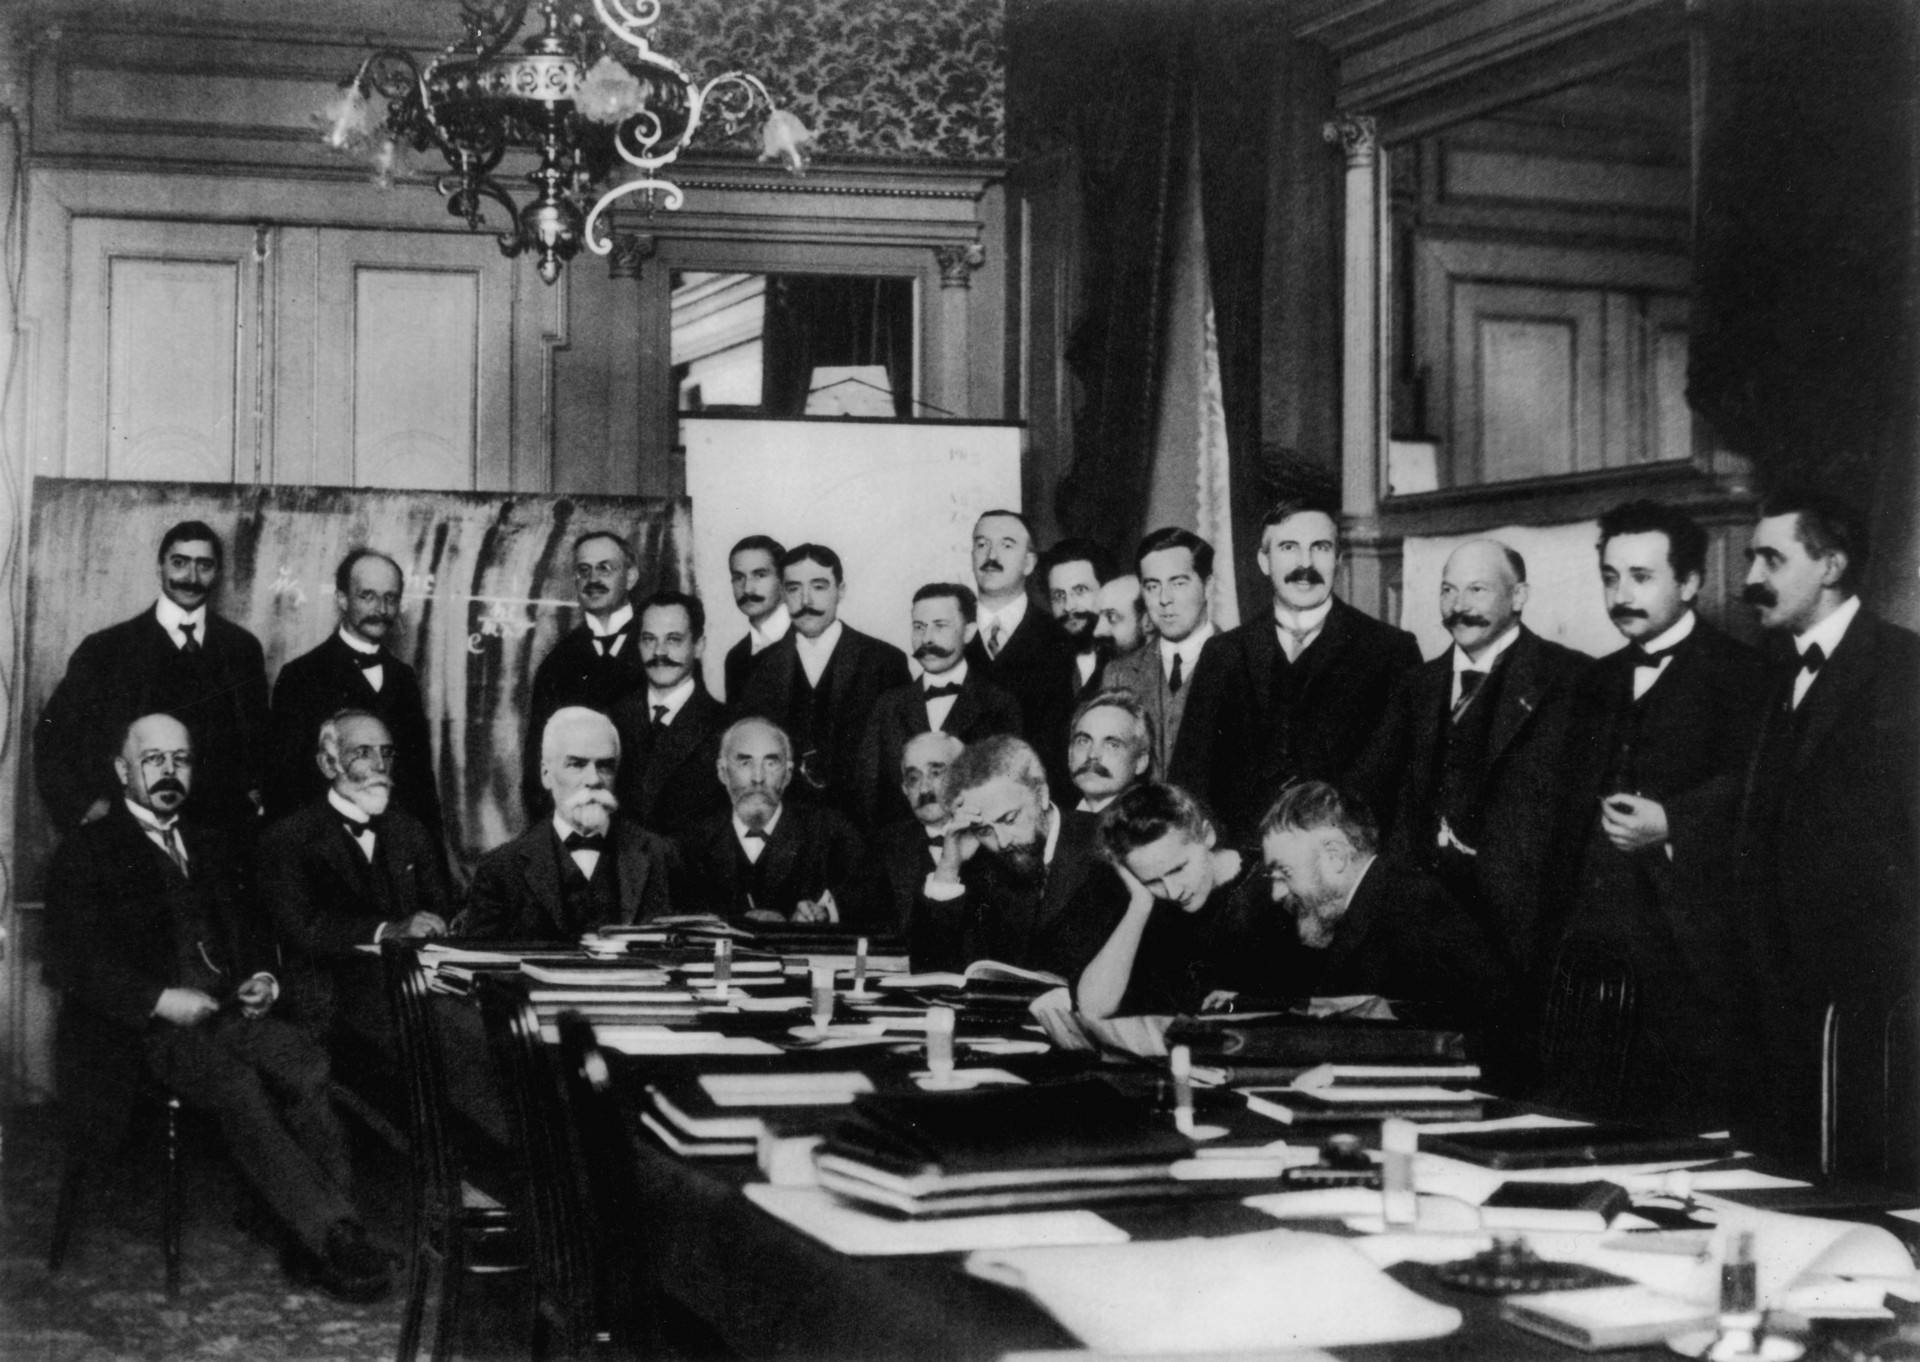 First Solvay Conference (1911), Curie (seated, second from right) confers with Henri Poincaré; standing, fourth from right, is Rutherford; second from right, Einstein; far right, Paul Langevin